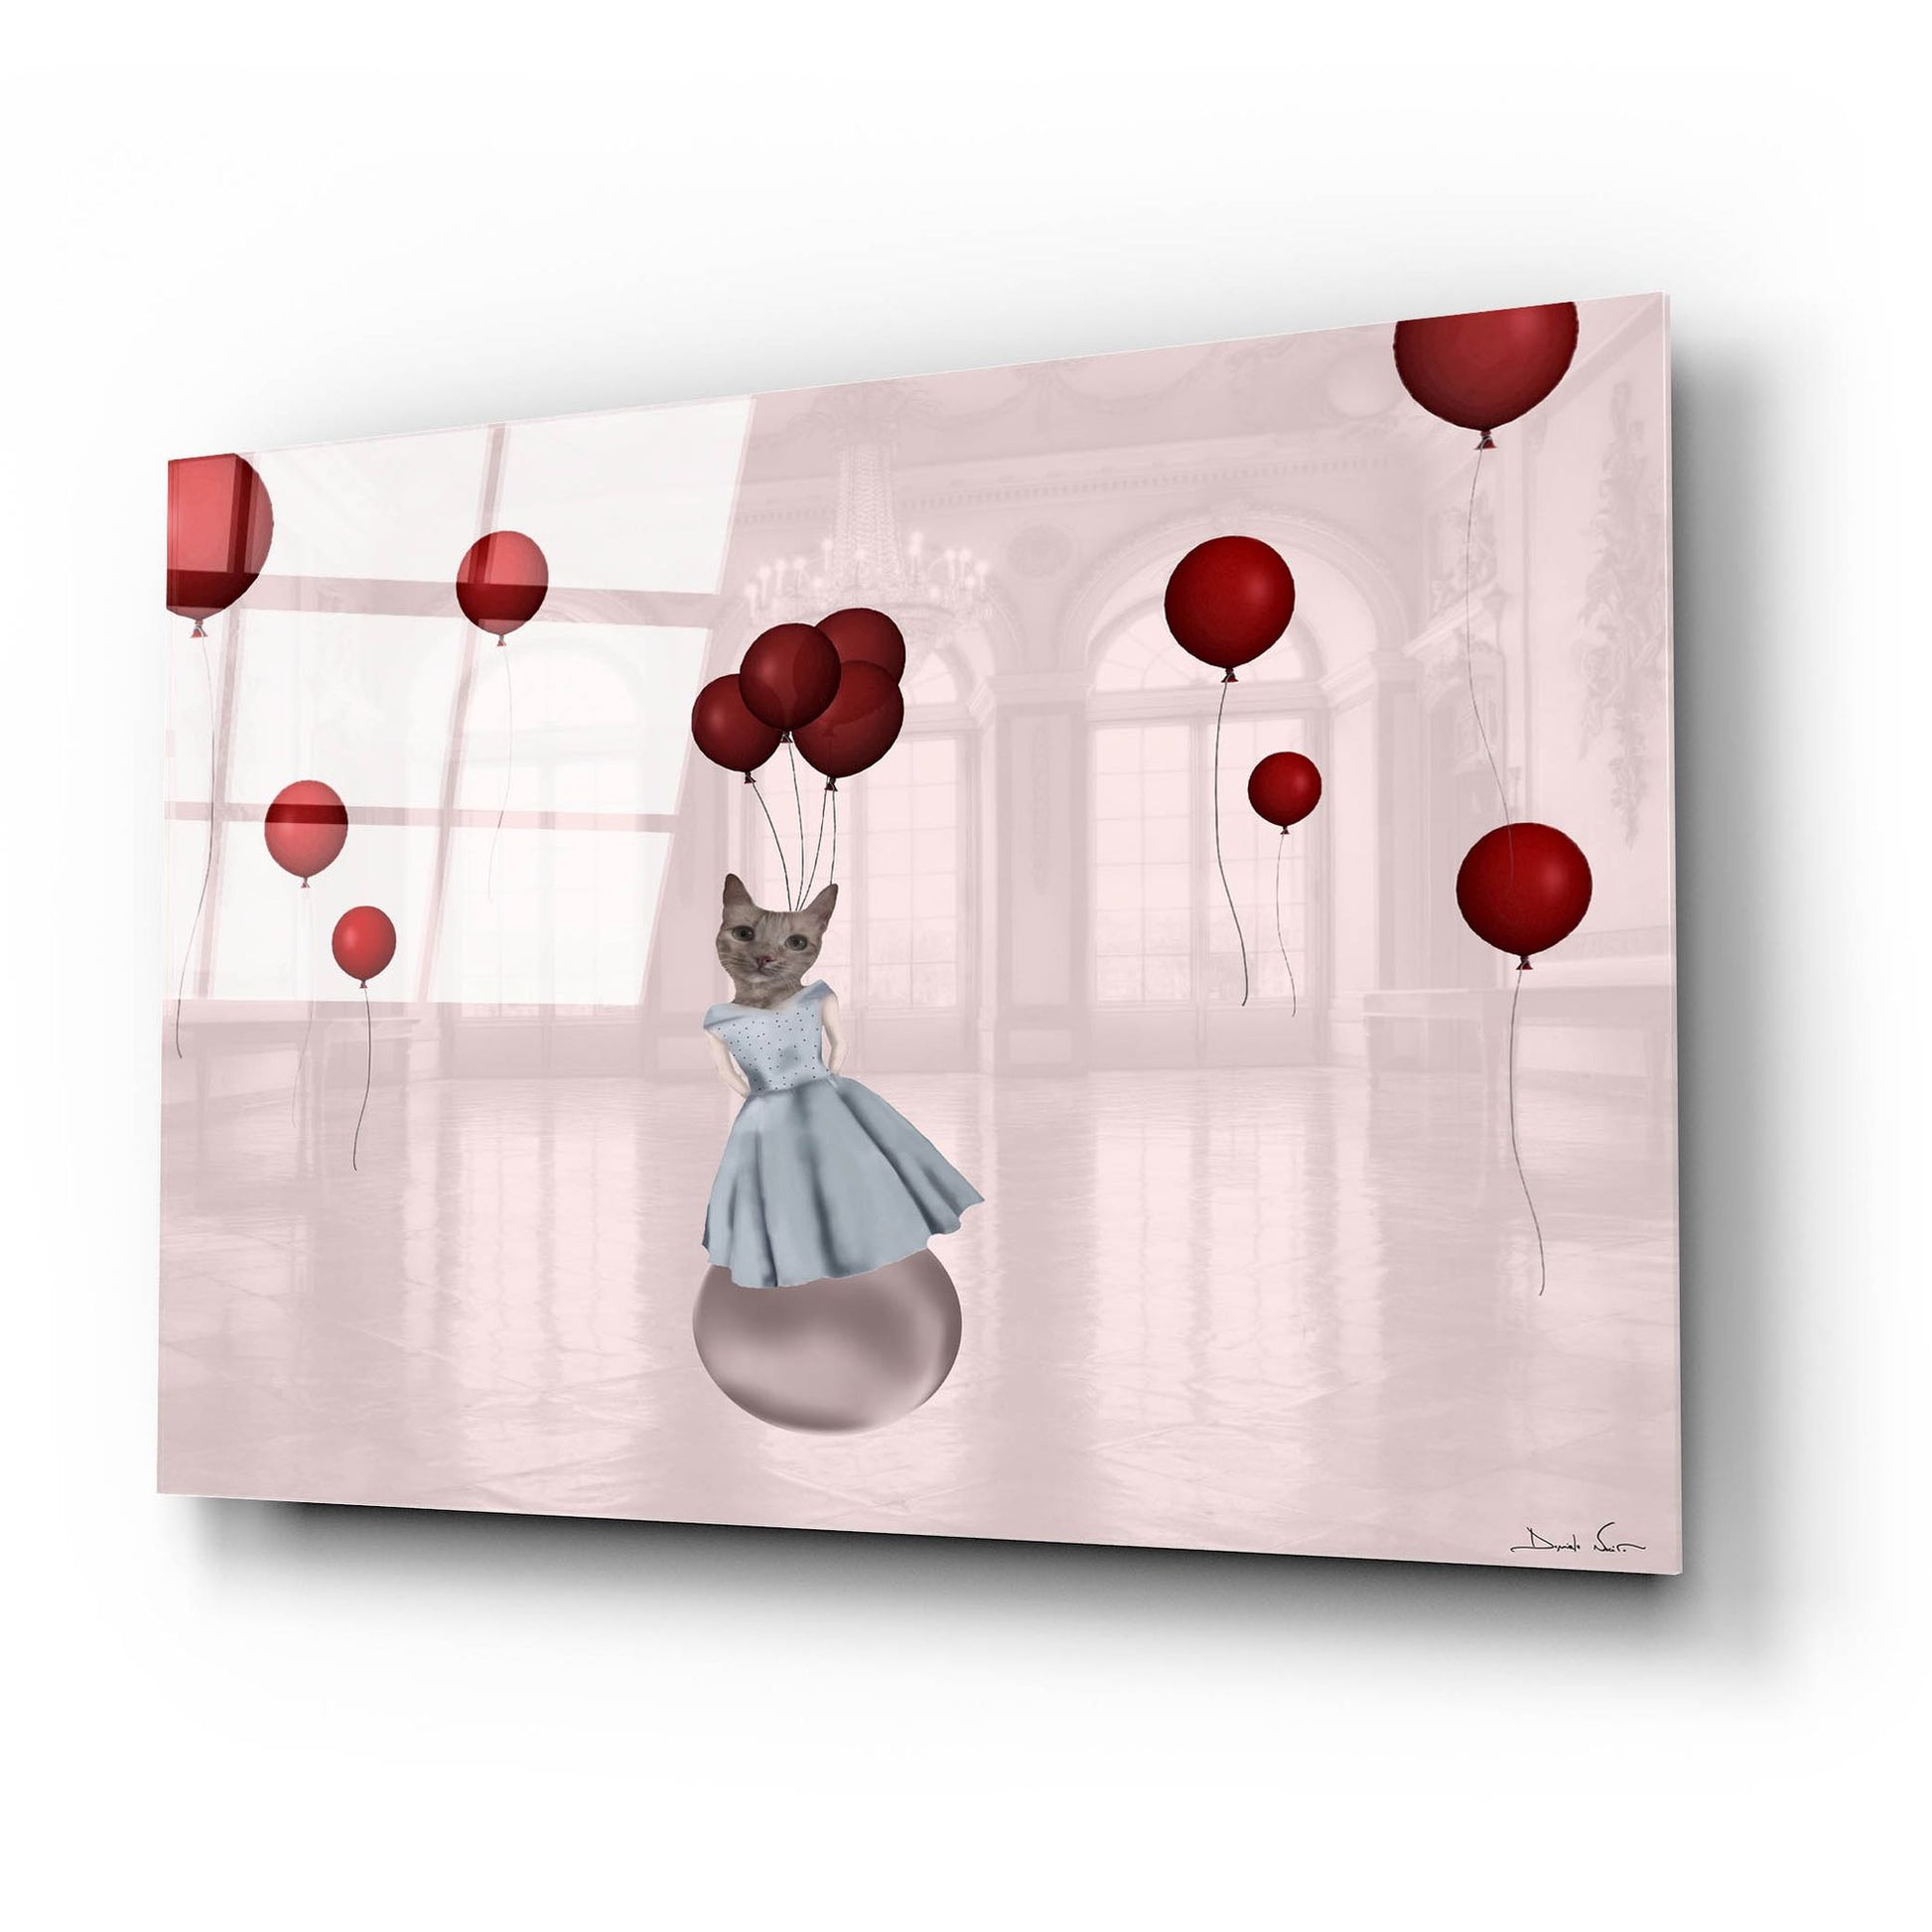 Epic Art 'Ball With Balloons' by Daniela Nocito, Acrylic Glass Wall Art,24x16